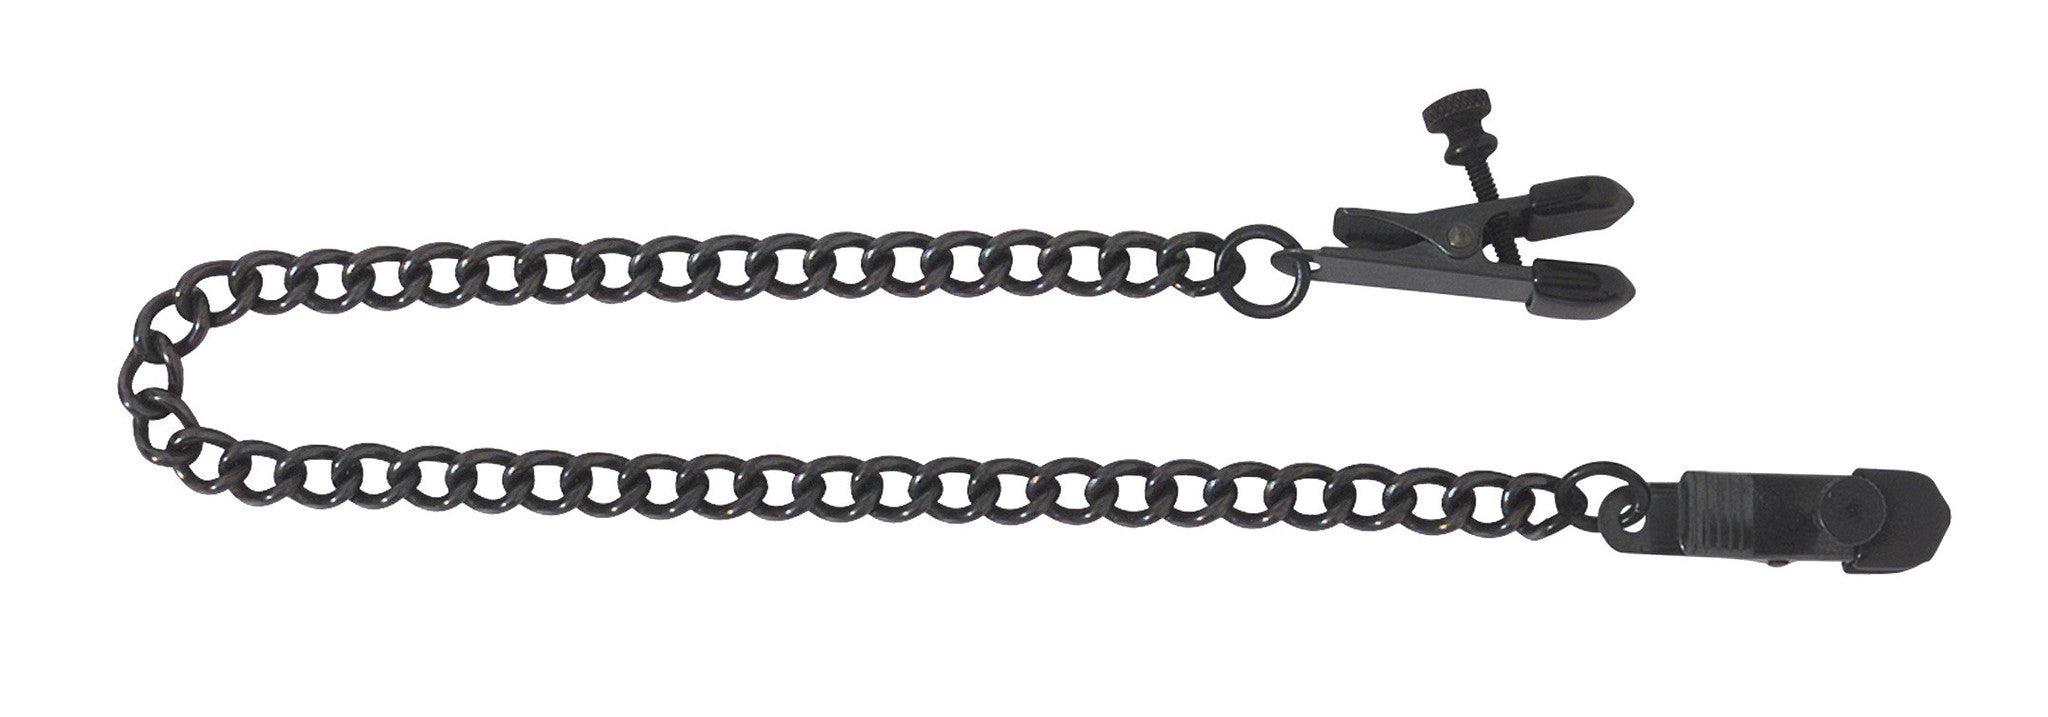 Black Adjustable Broad Tip Clamp with Chain Black - Passionfruit